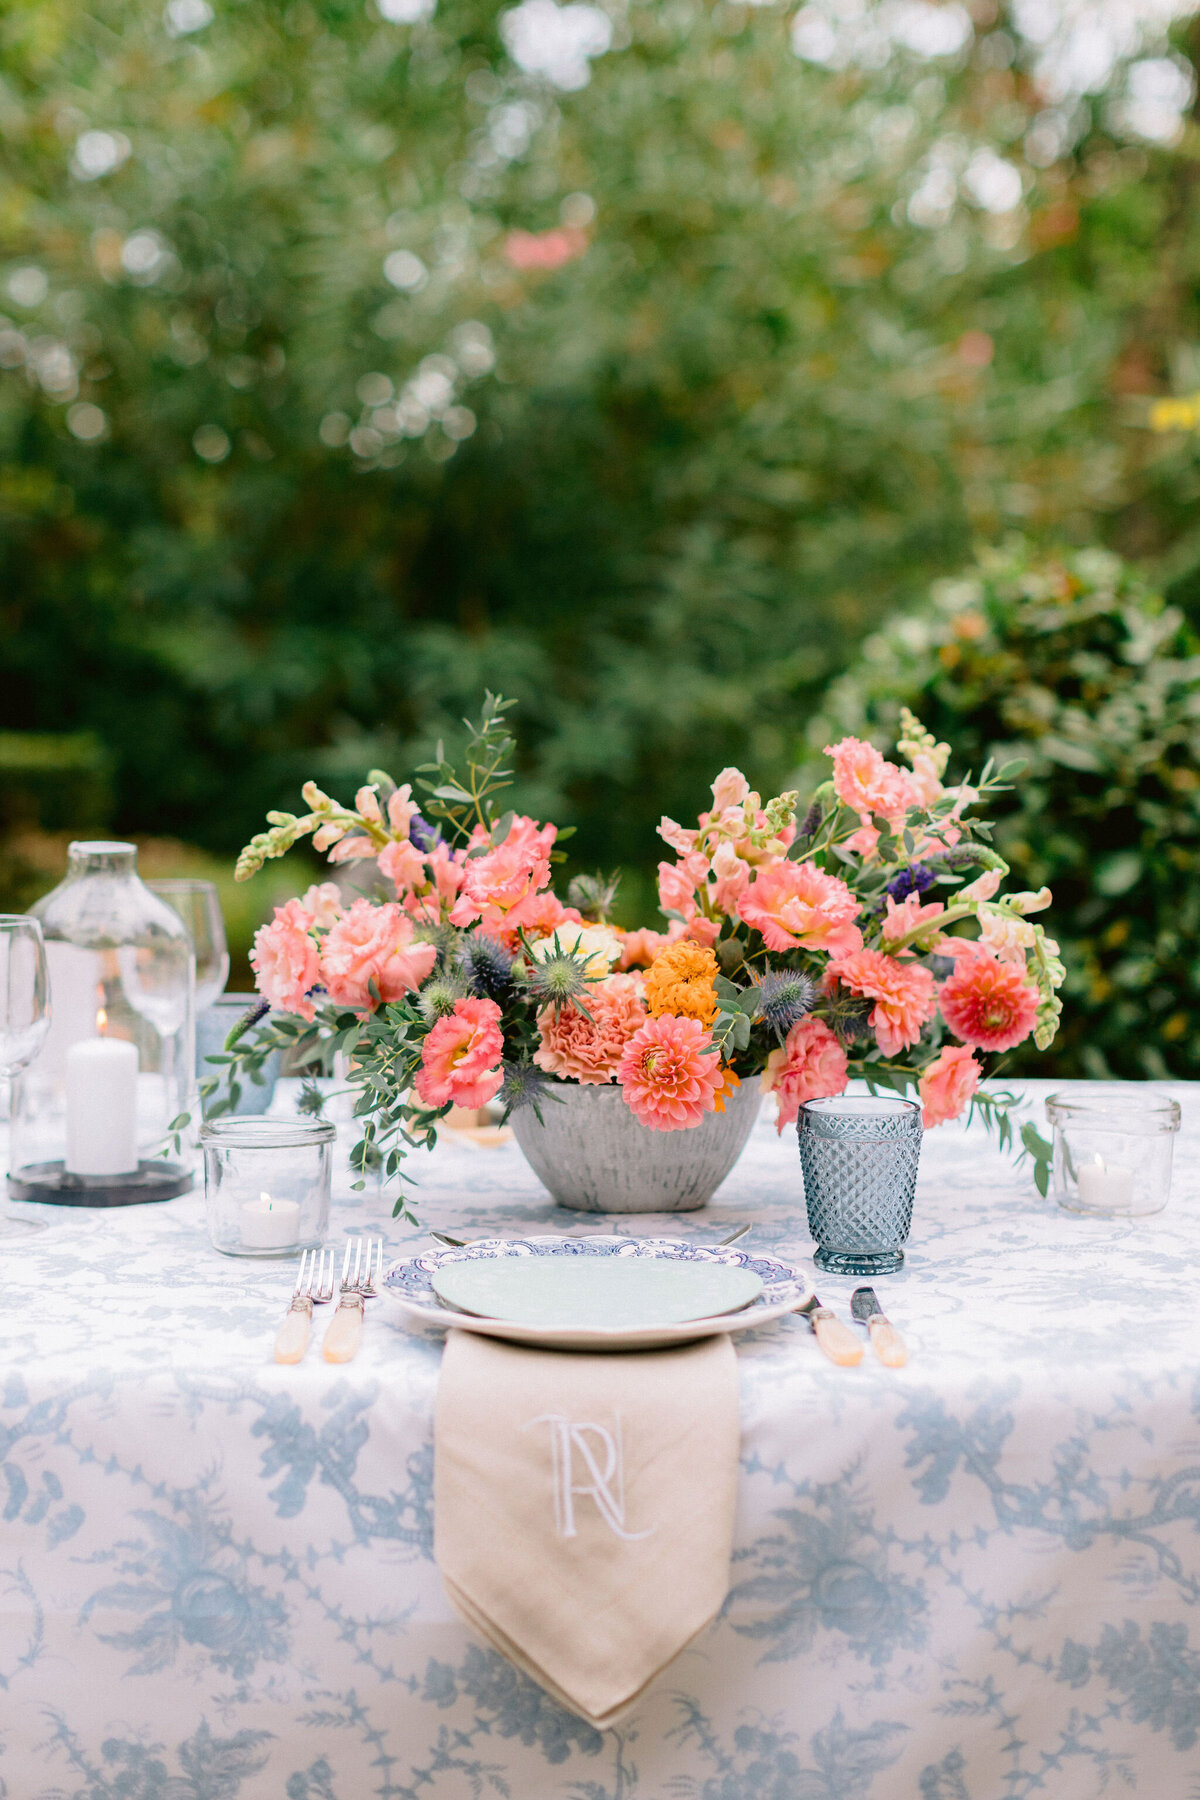 Romantic details and tableware